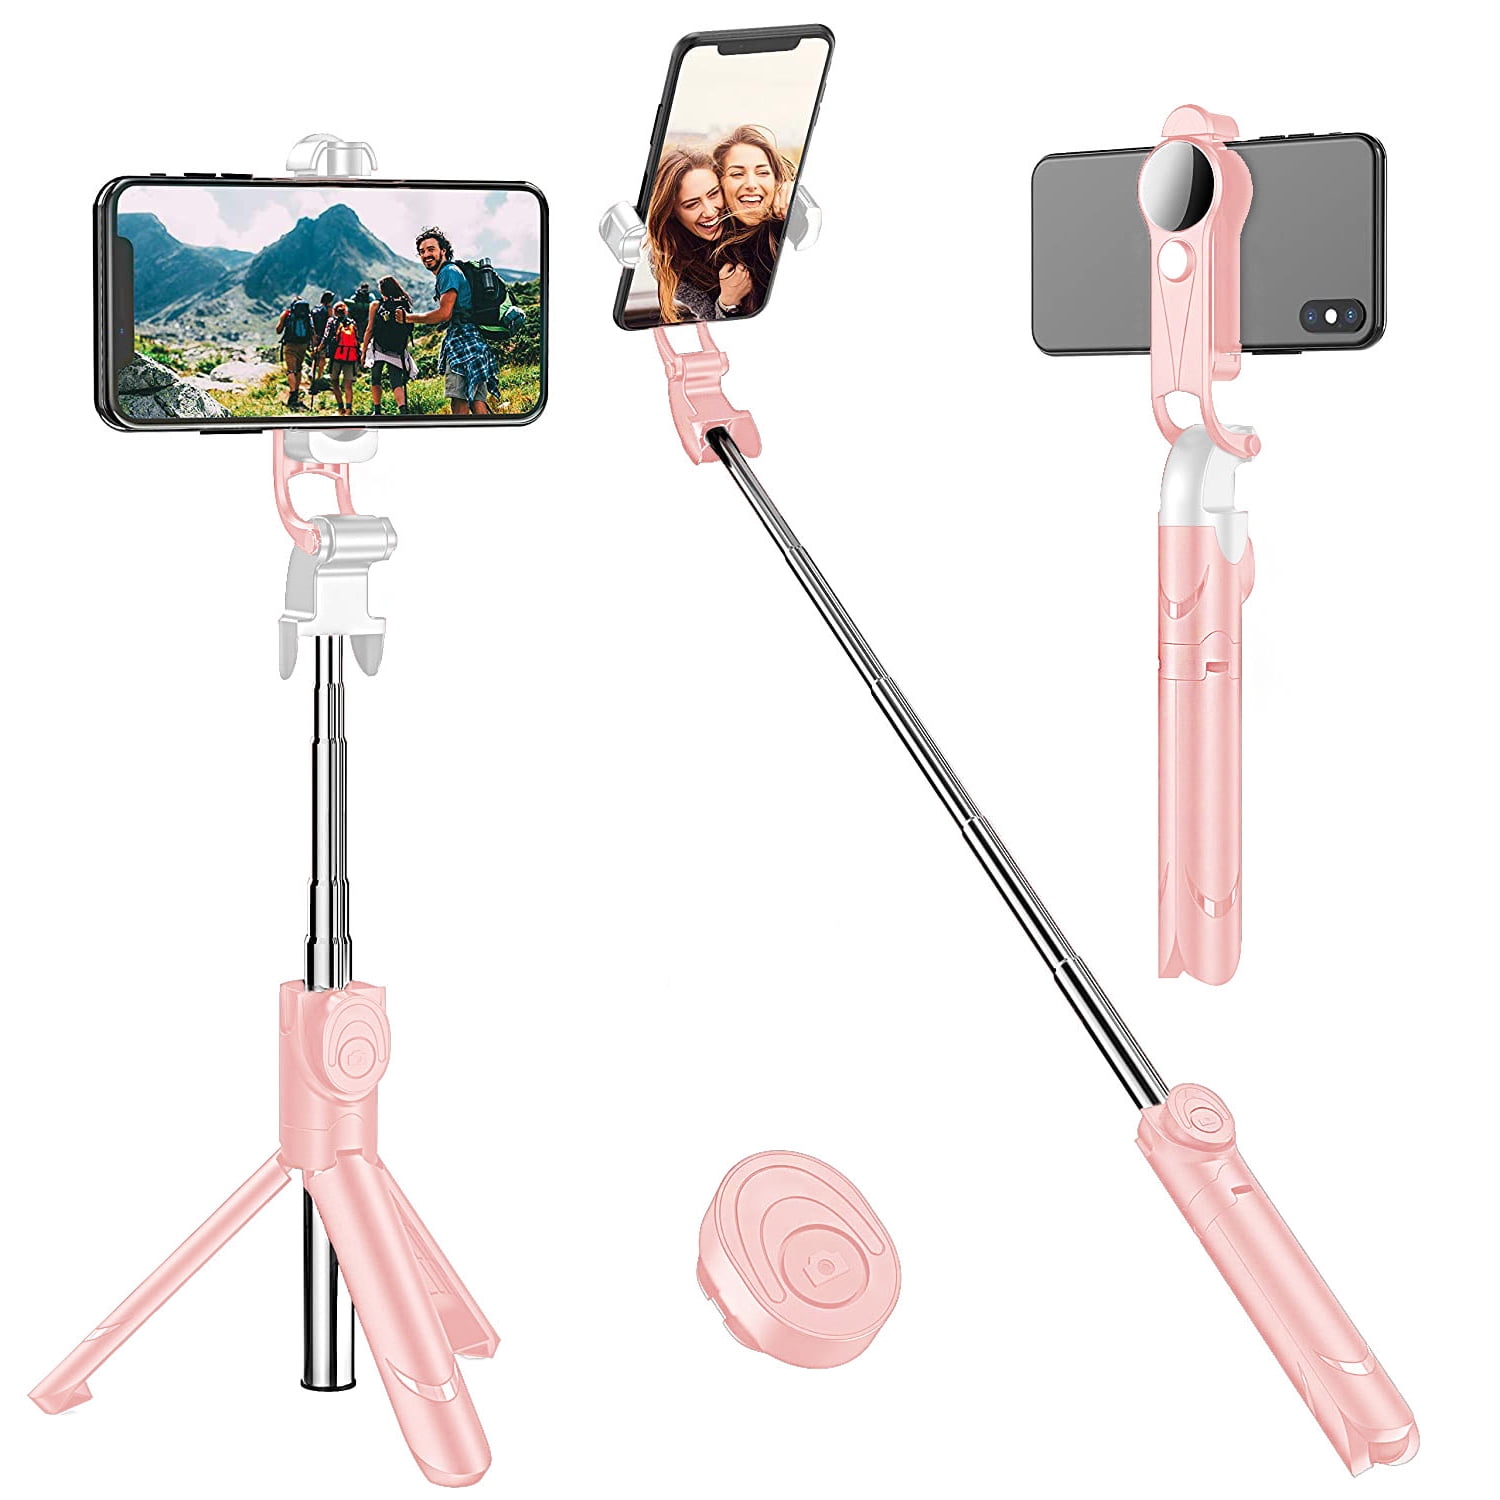 Nominaal Maar Torrent Bluetooth Selfie Stick, Extendable and Tripod Stand Selfie Stick with  Wireless Remote for iPhone XR/XS/X/8/Plus/7/Plus/SE/6S/6/Plus, Galaxy  S9/S8/S7/S6, Android, More - Walmart.com